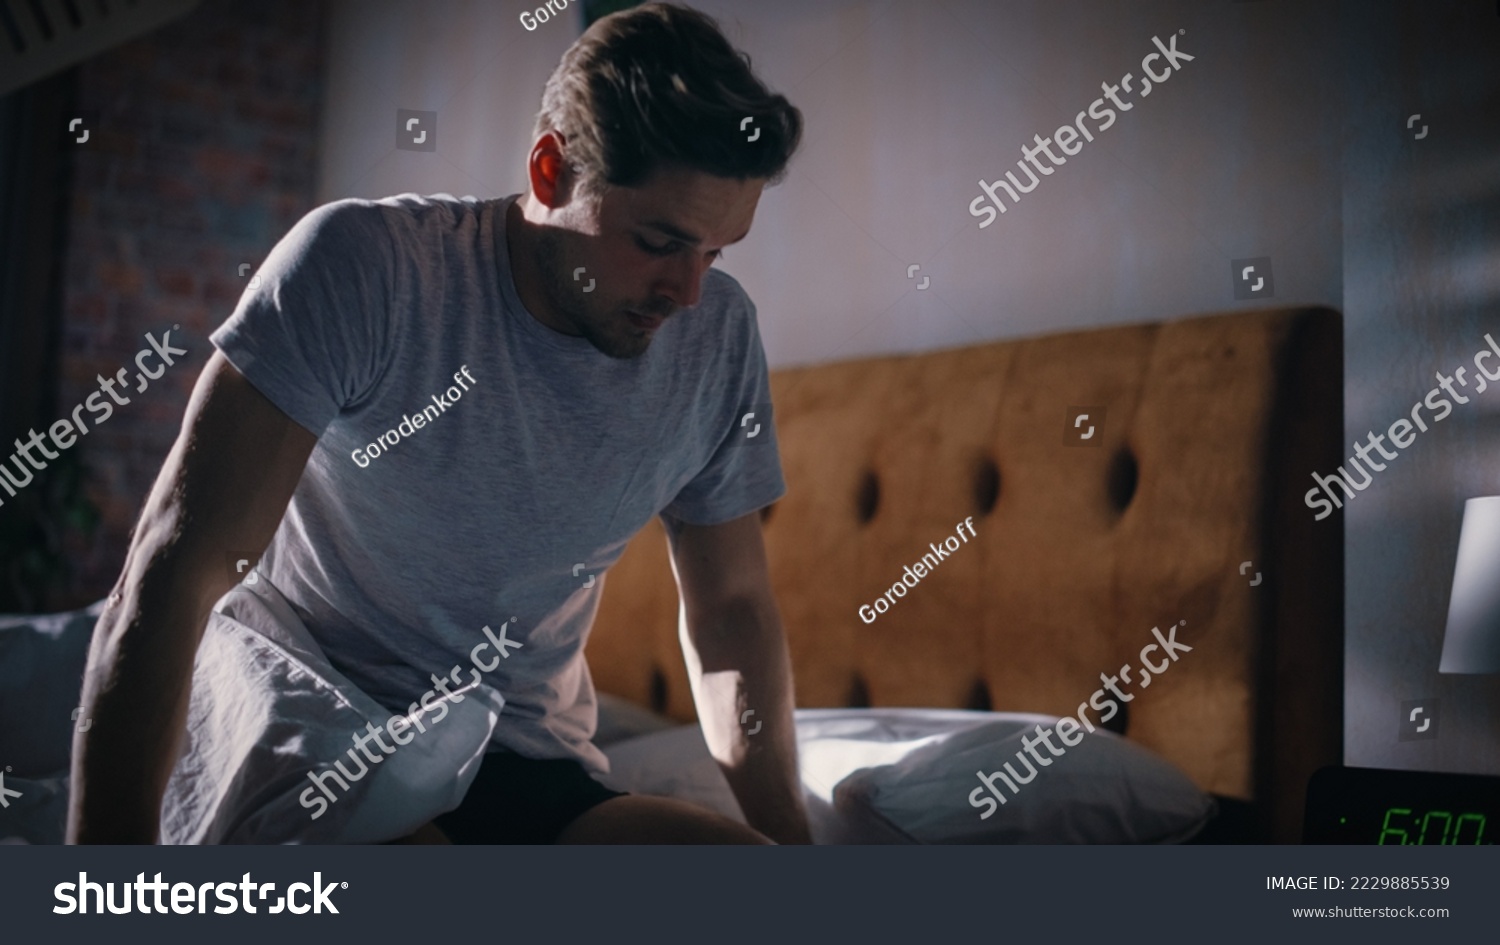 Man Wakes Up, Turns off Alarm Clock with Frustration, after Sleepless Insomniac Night. Early Rising Stressed Man Ready to Face Day of Problem Solving. He is Tired, Upset #2229885539